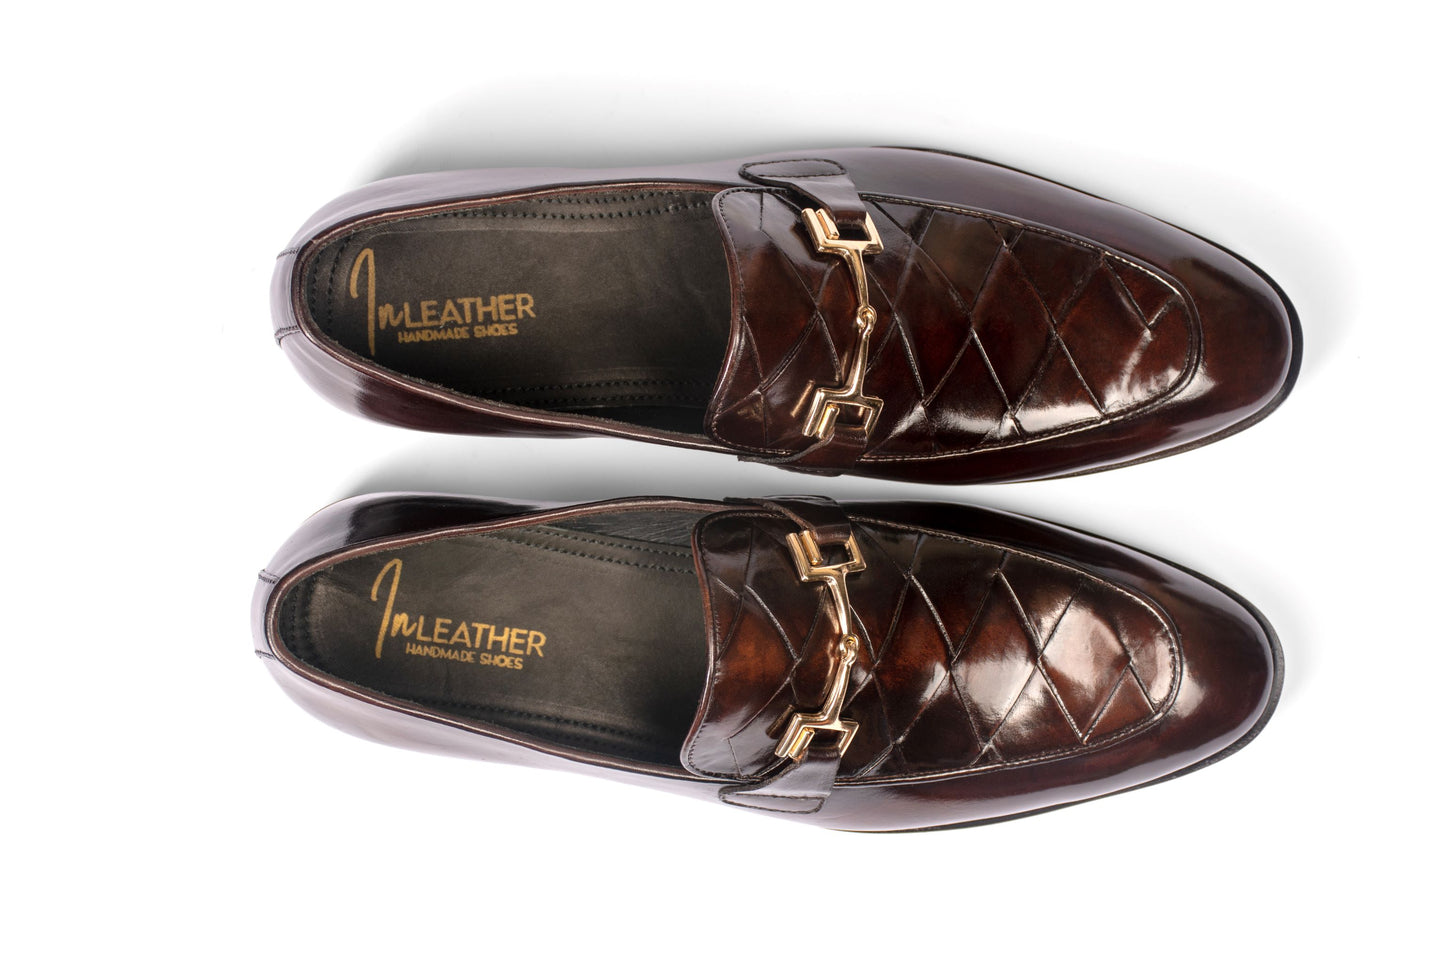 Inleather Loafers 012